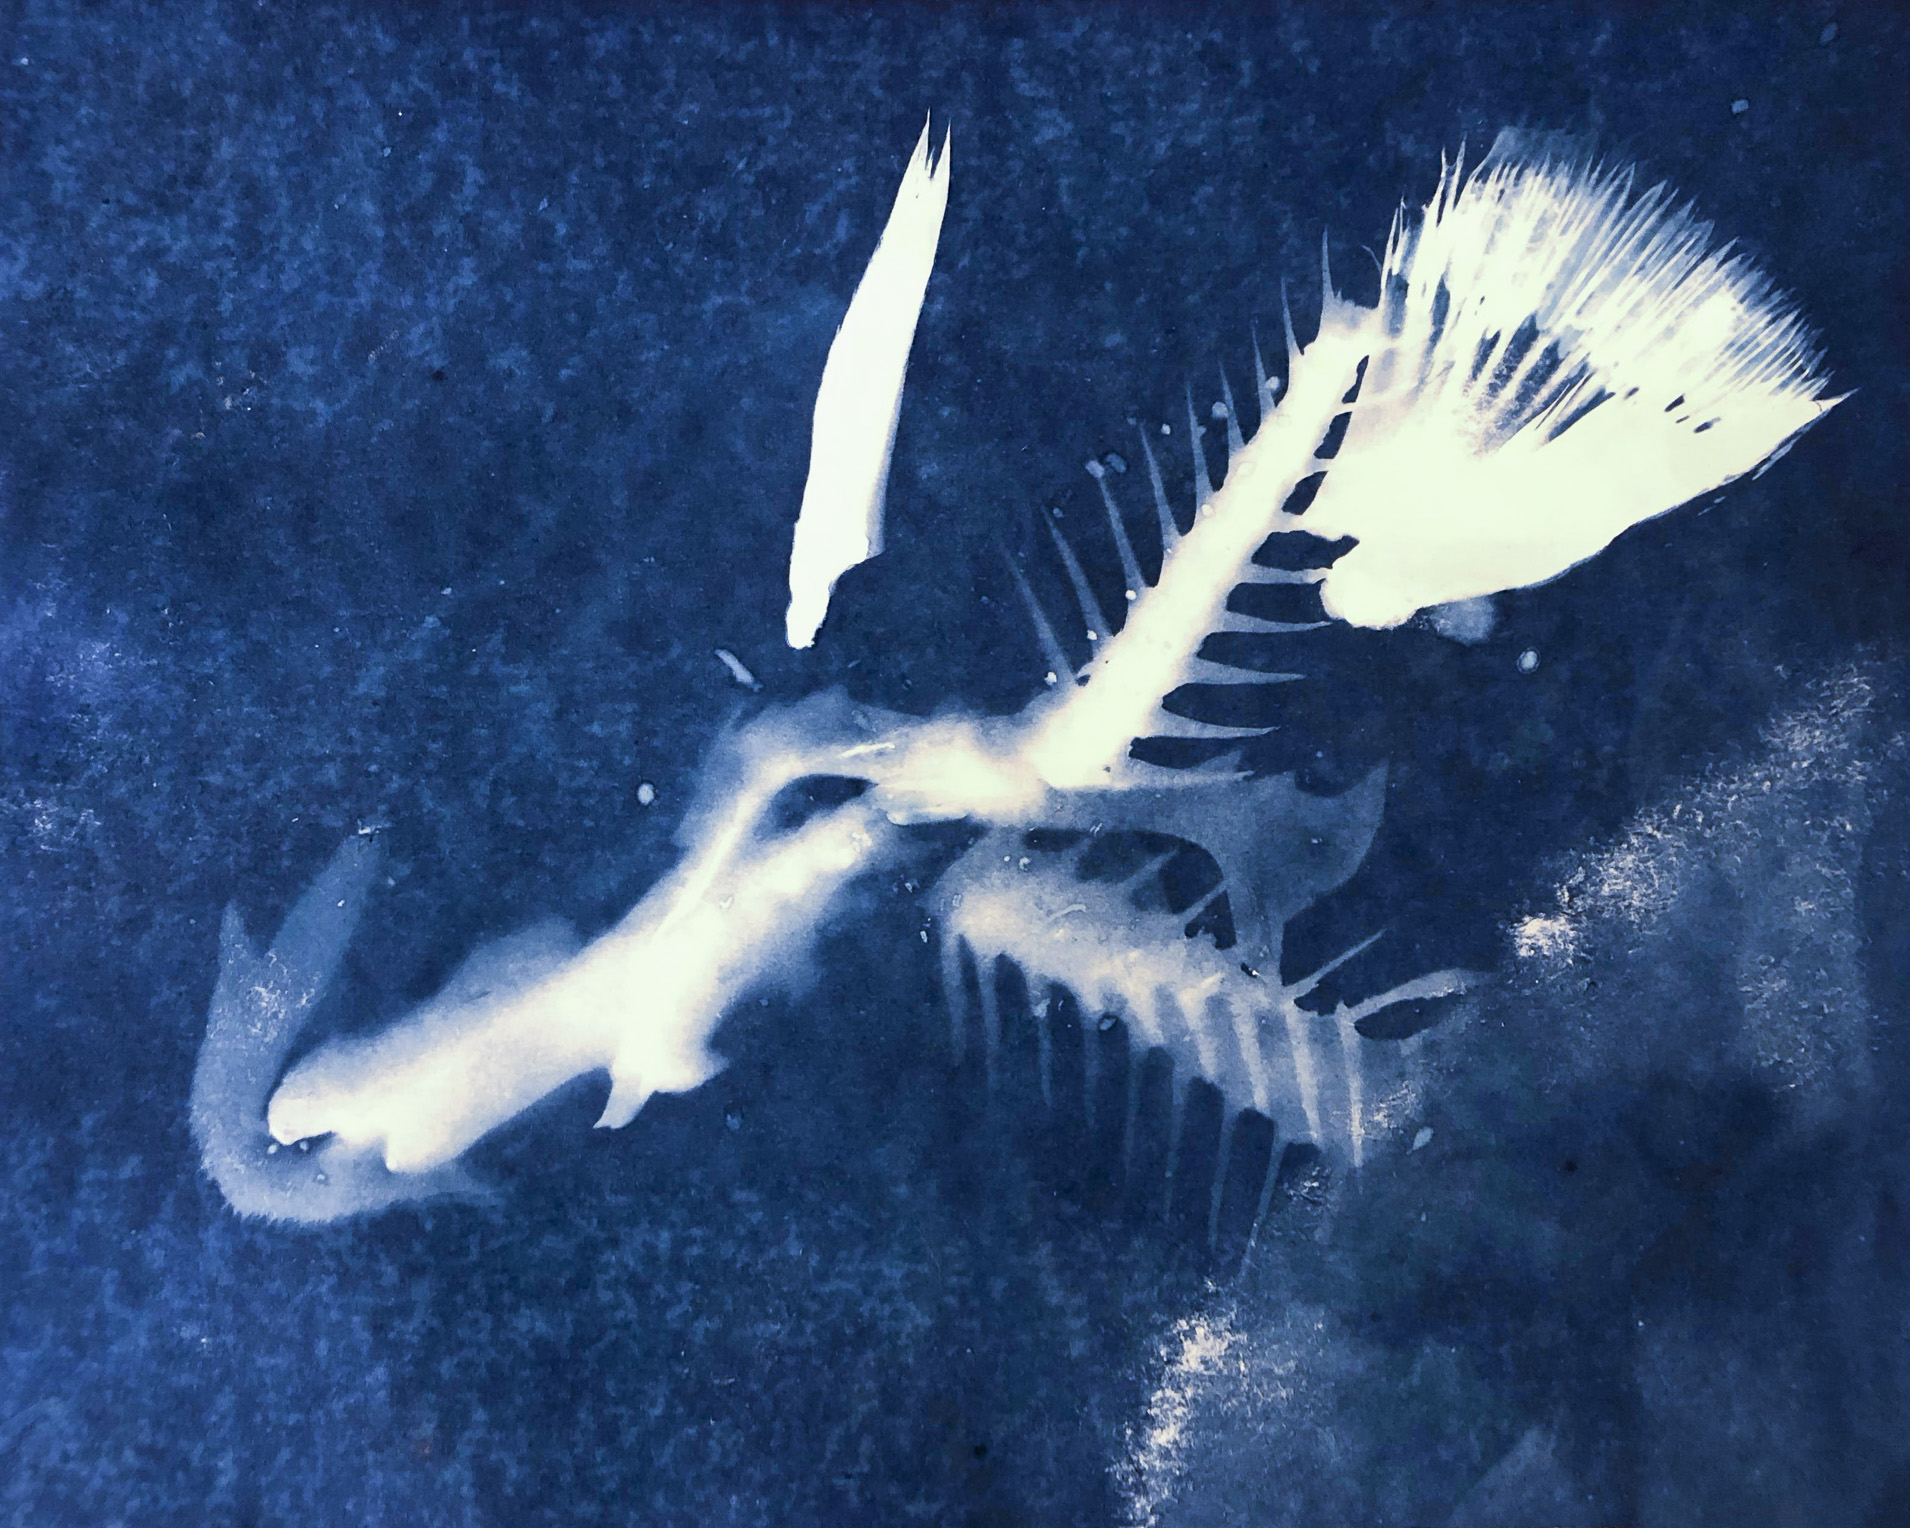 A cyanotype image of abstract nature